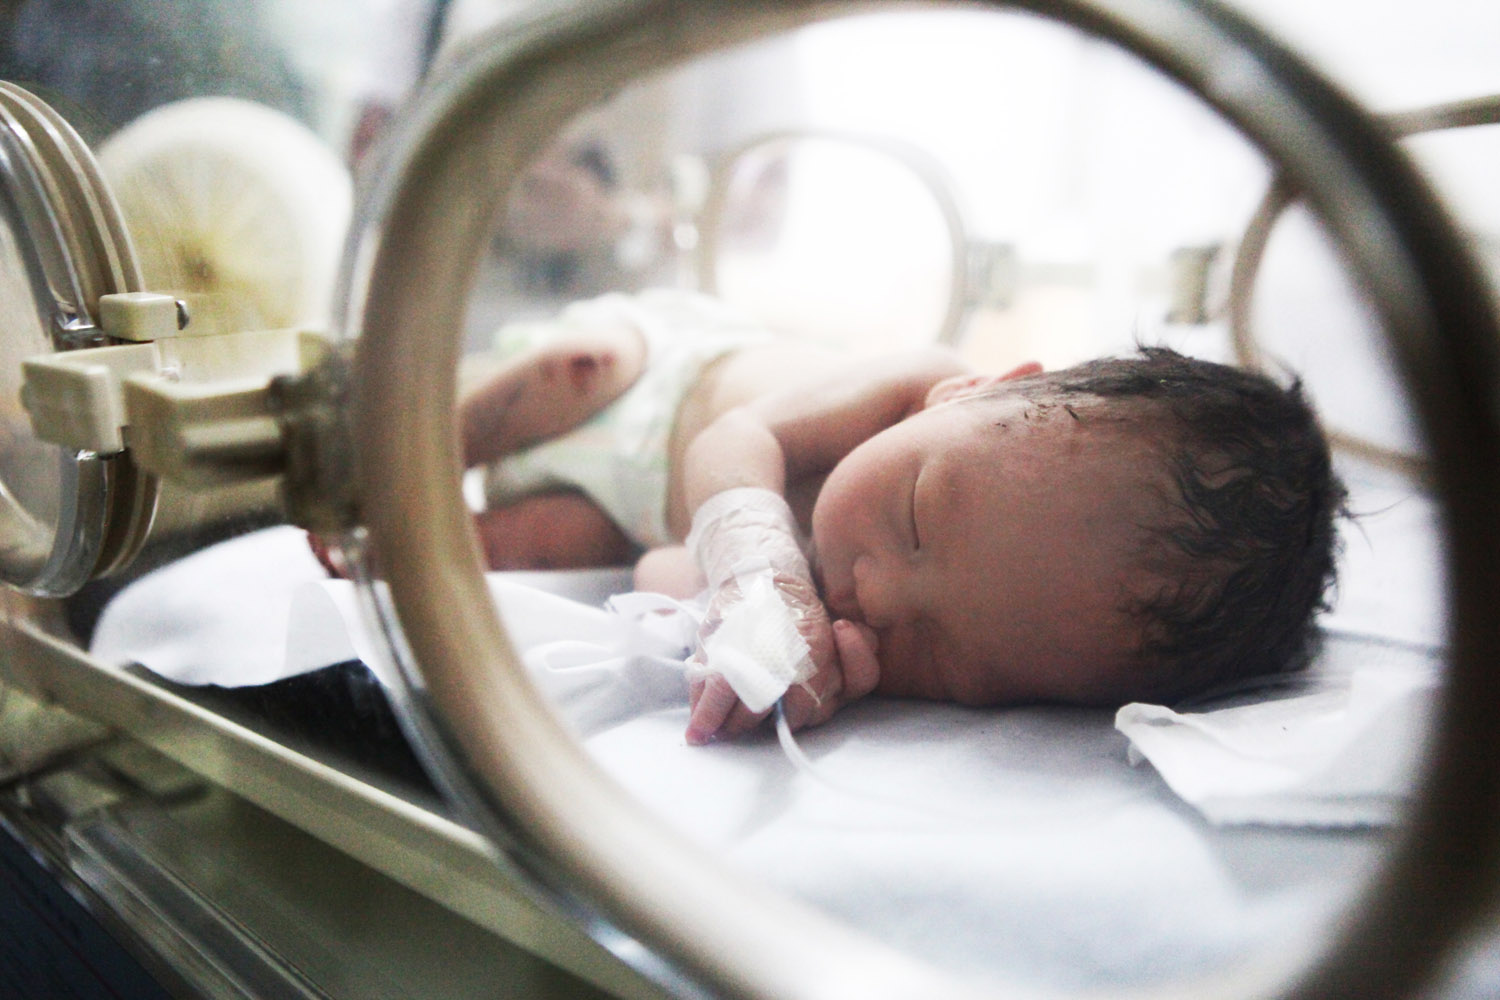 May 28, 2013. The sleeping infant, who had been rescued from the sewer pipe in a residential building, is seen at a hospital in Jinhua, Zhejiang province, east China.